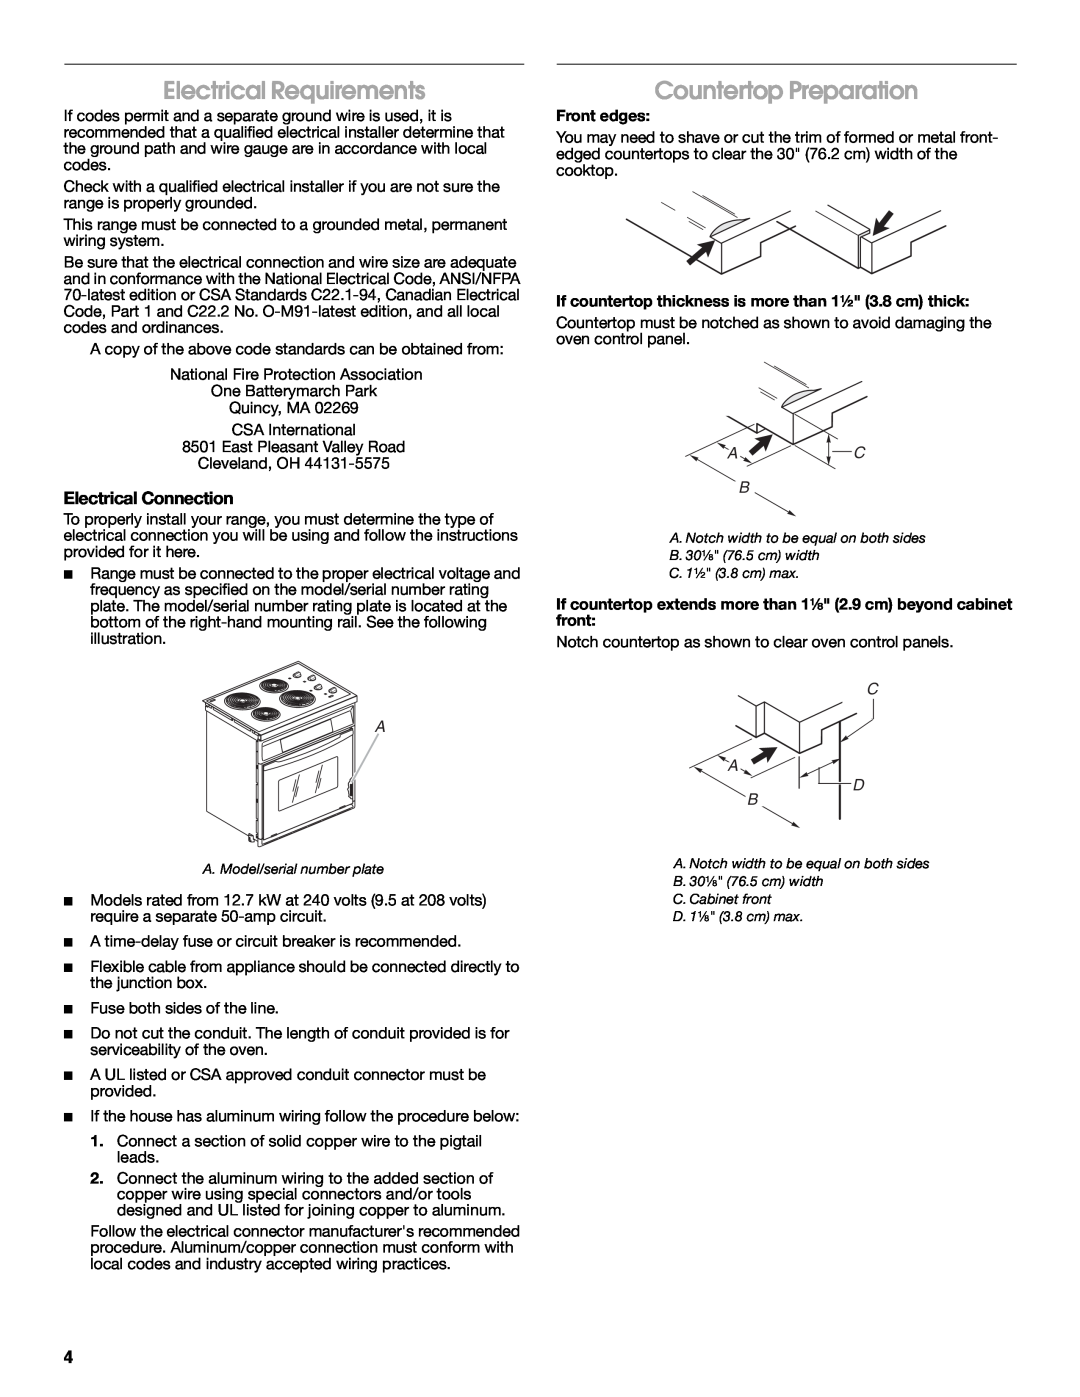 Whirlpool W10044940 Electrical Requirements, Countertop Preparation, Electrical Connection, Front edges, Ac B, C A D B 